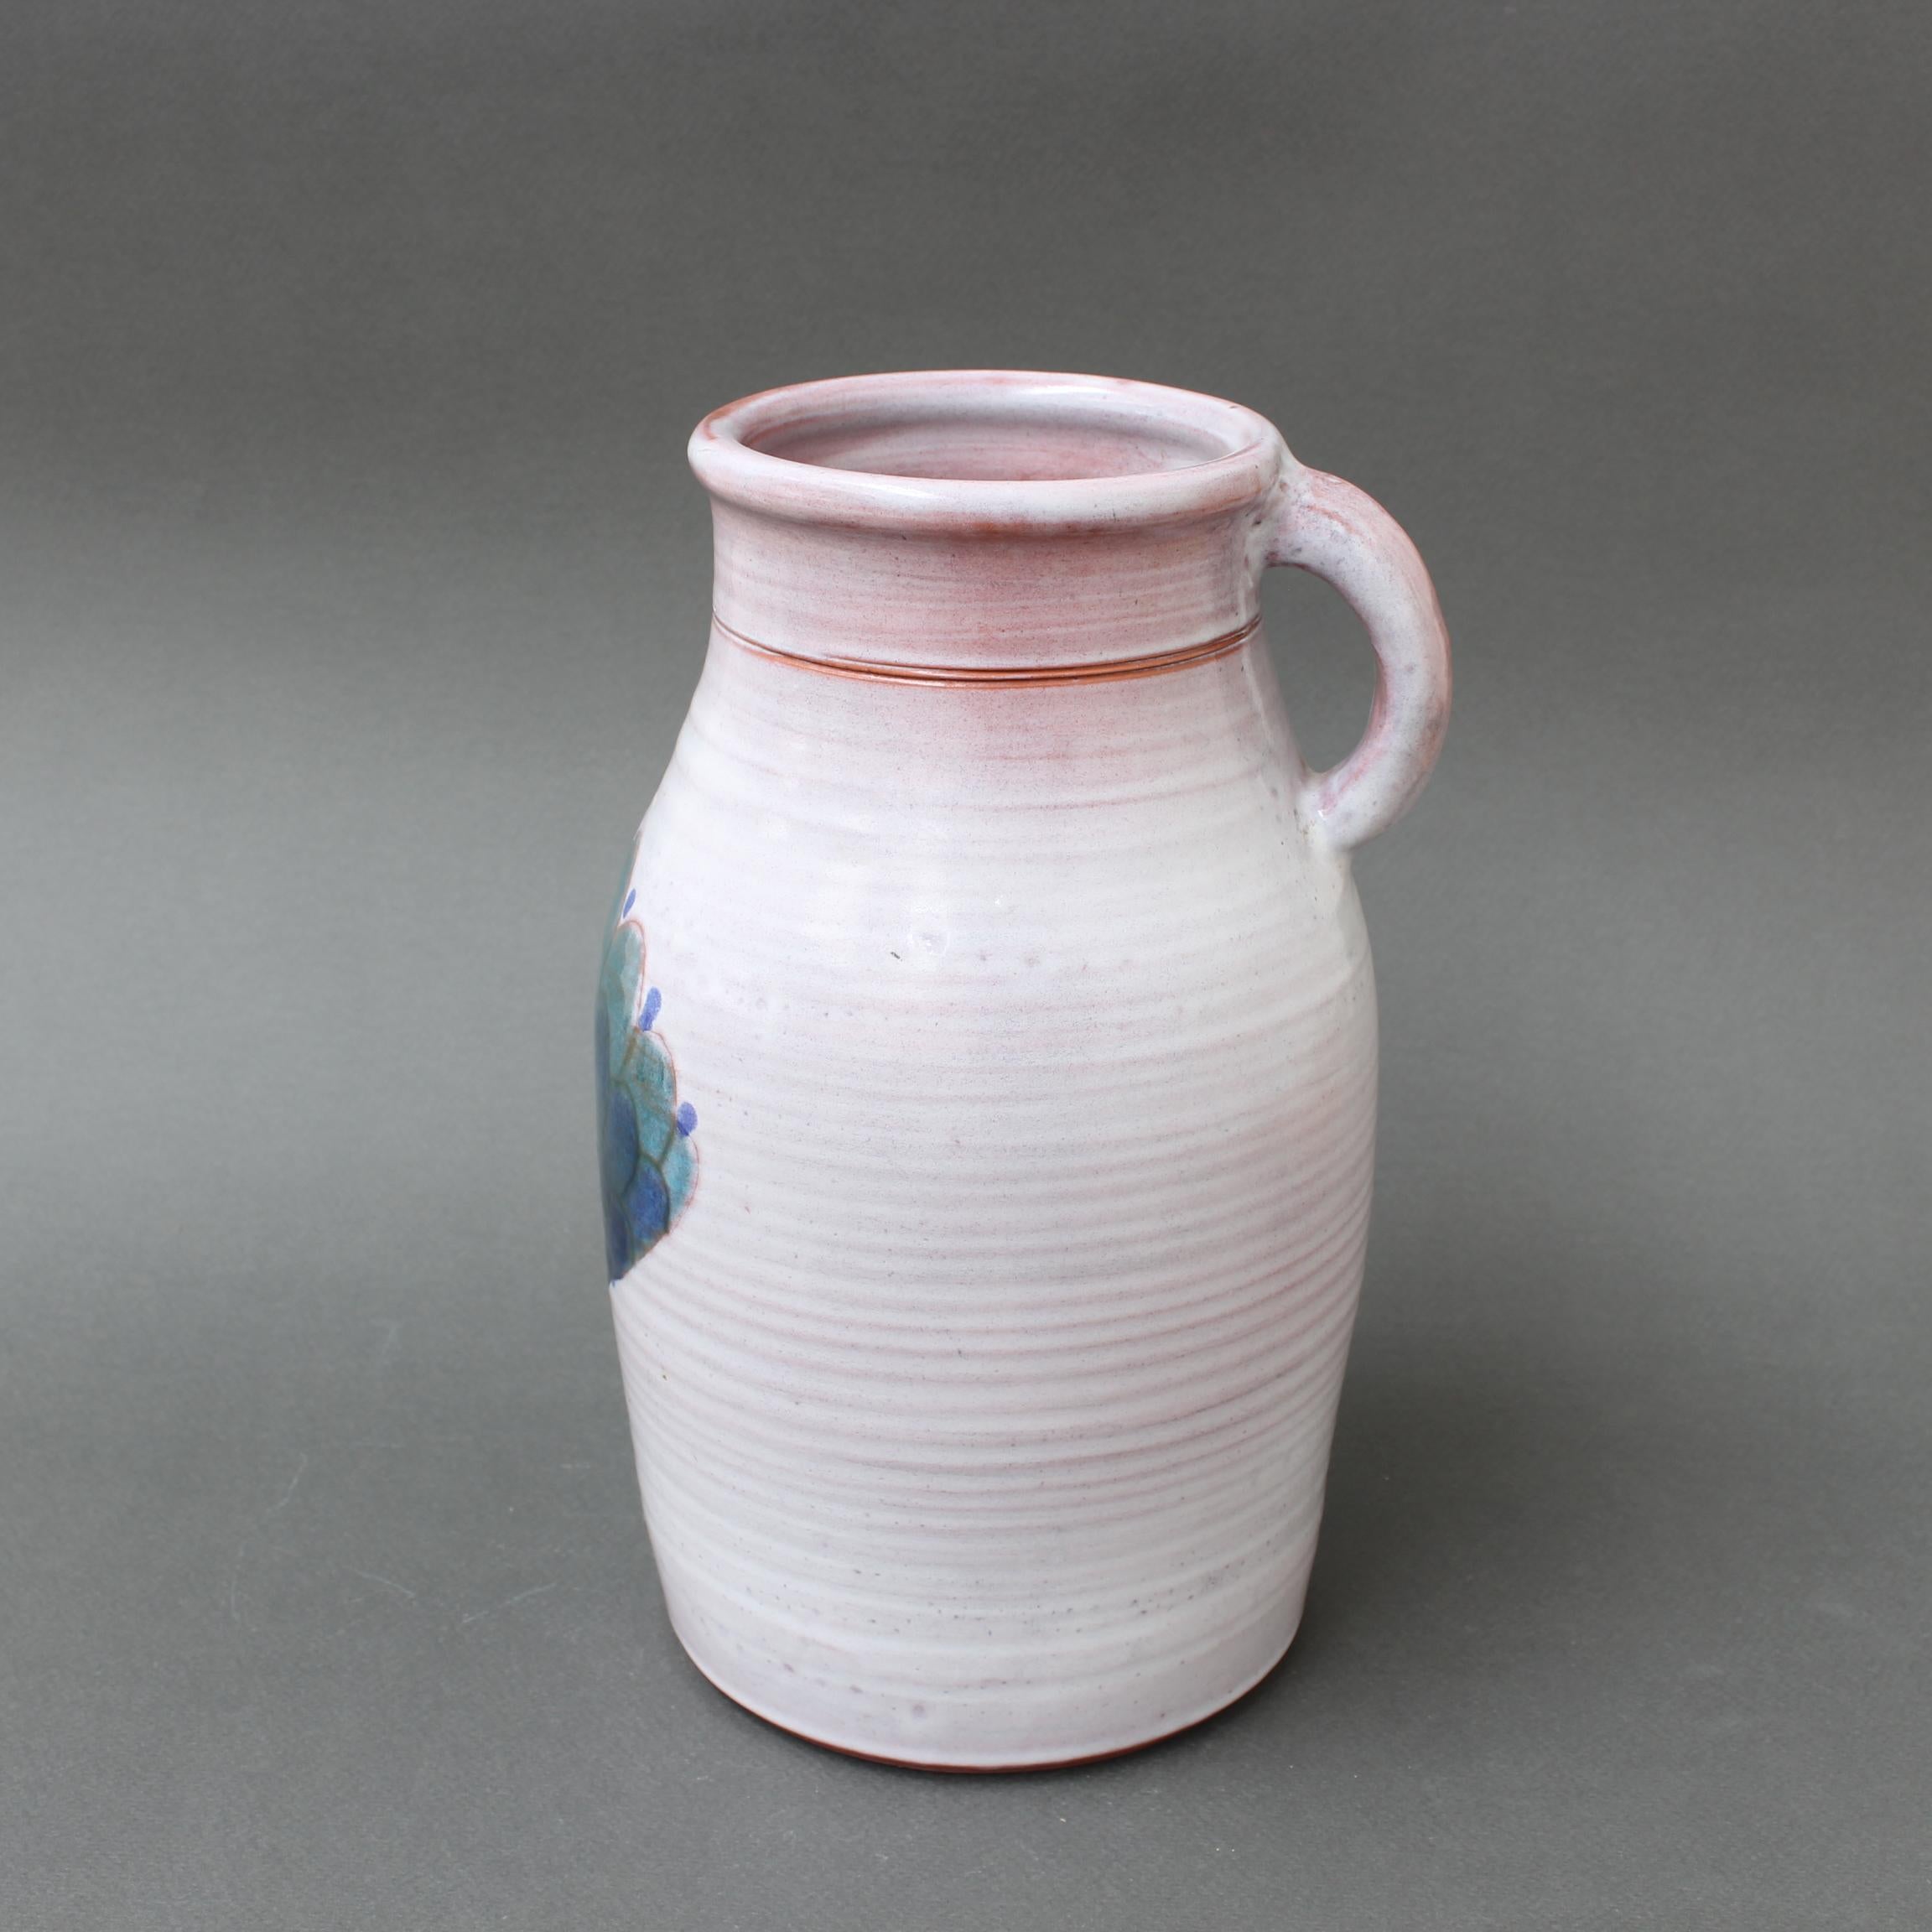 Hand-Painted Vintage French Ceramic Pitcher by Cloutier Brothers (circa 1970s) For Sale